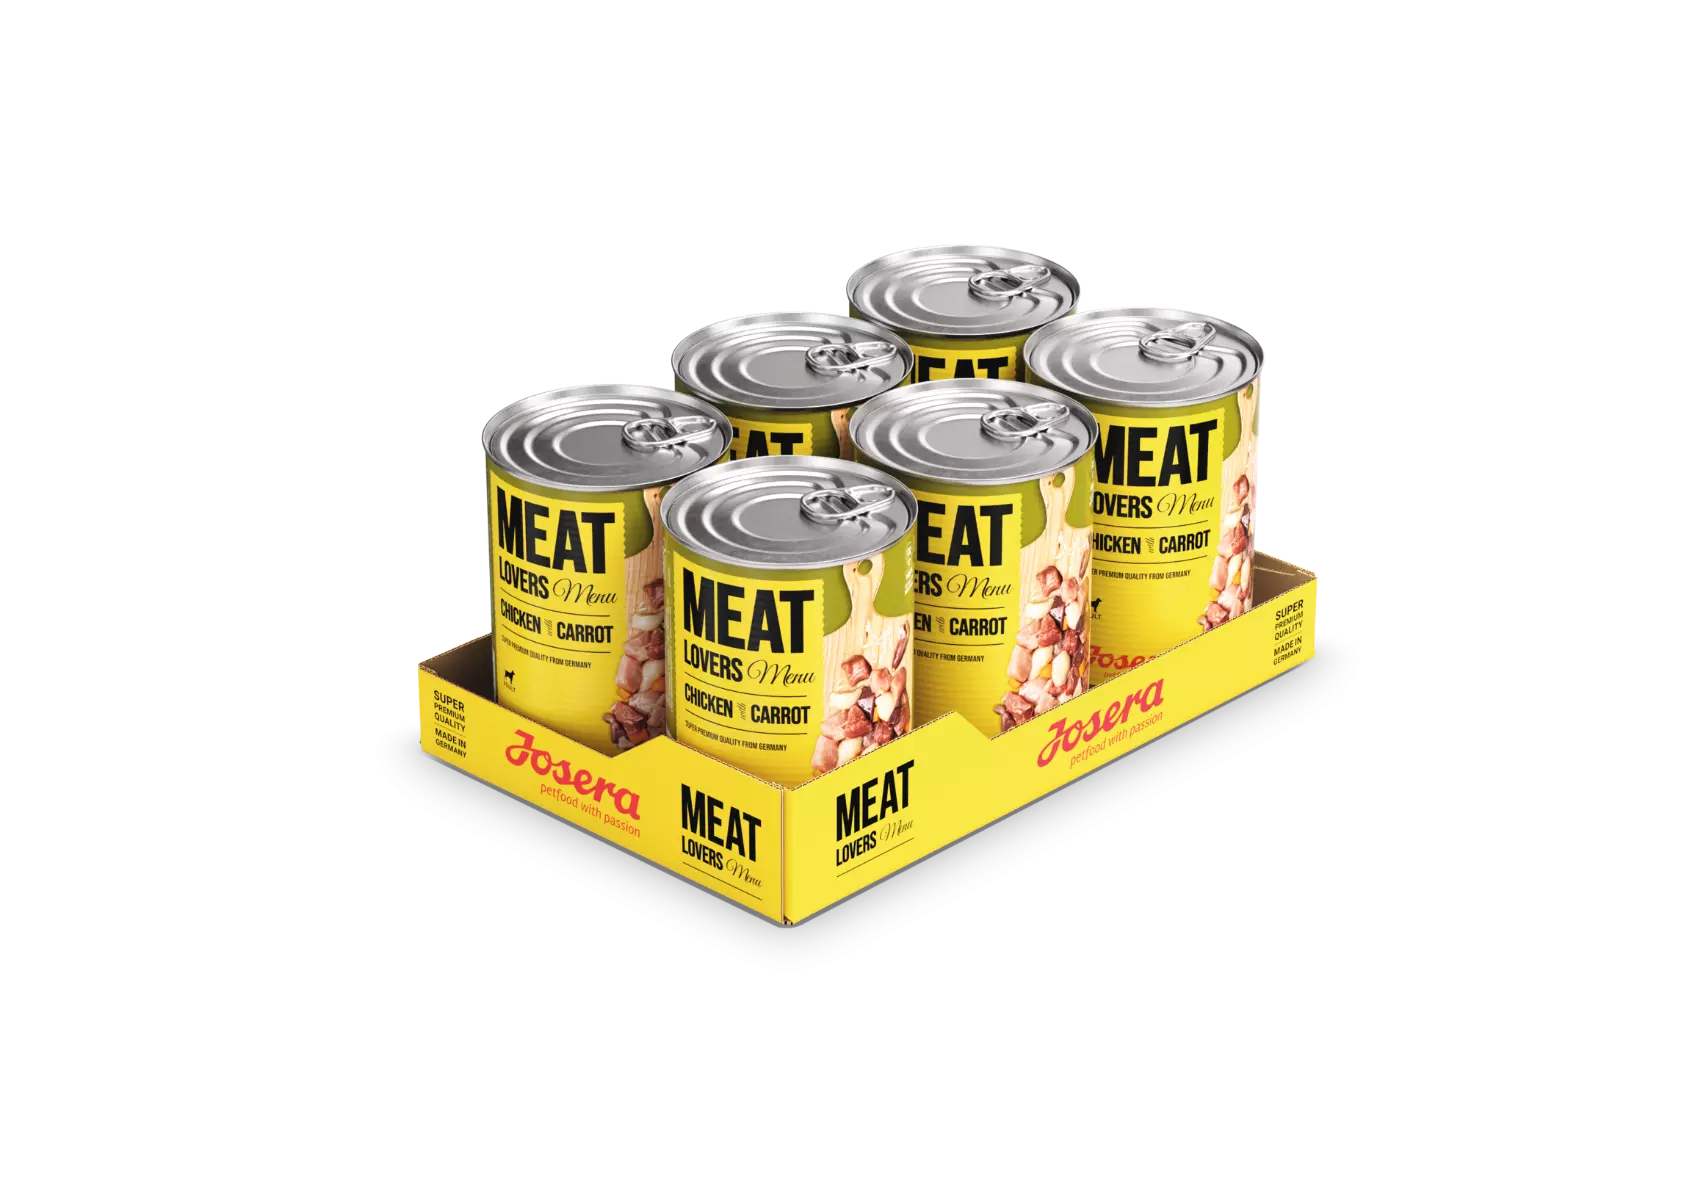 Josera Meat Lovers Menu Chicken with Carrot 6x800g